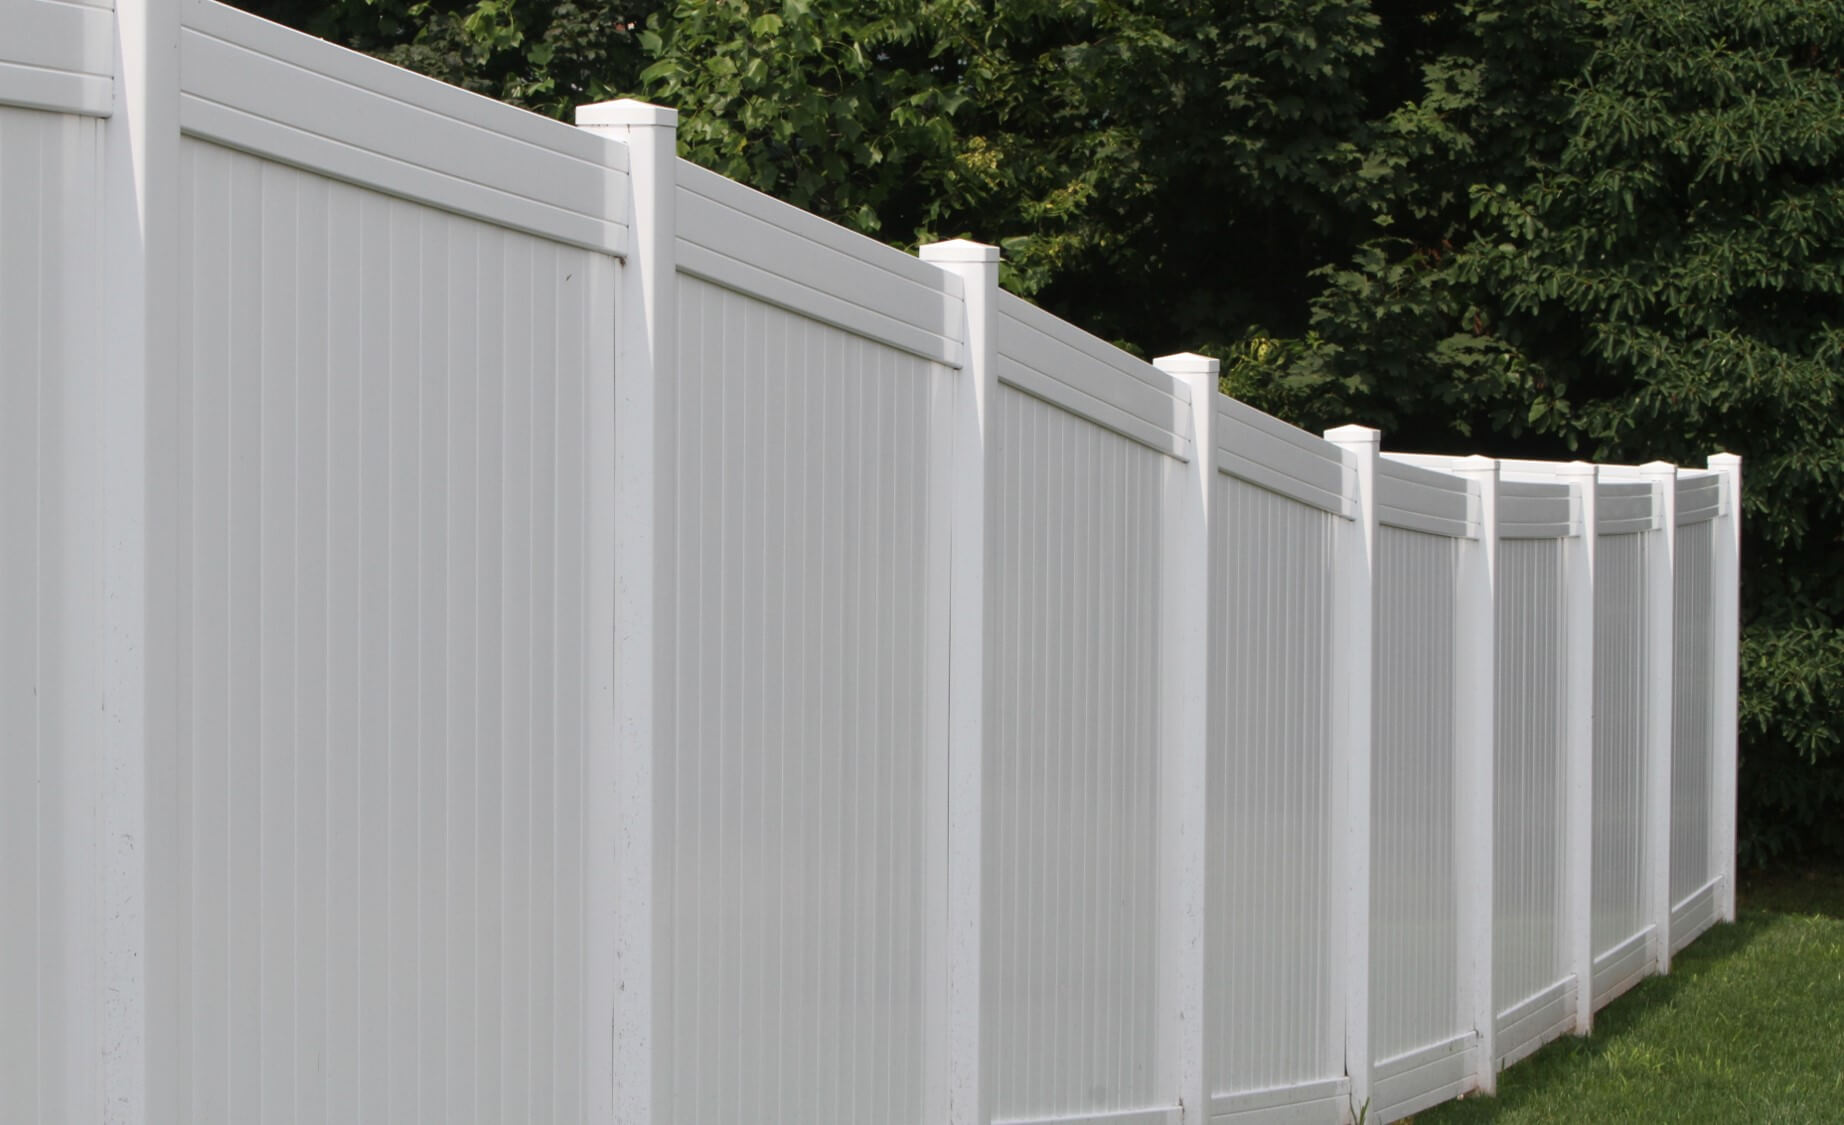 Nantucket Vinyl Privacy Fence - Superior Plastic Products